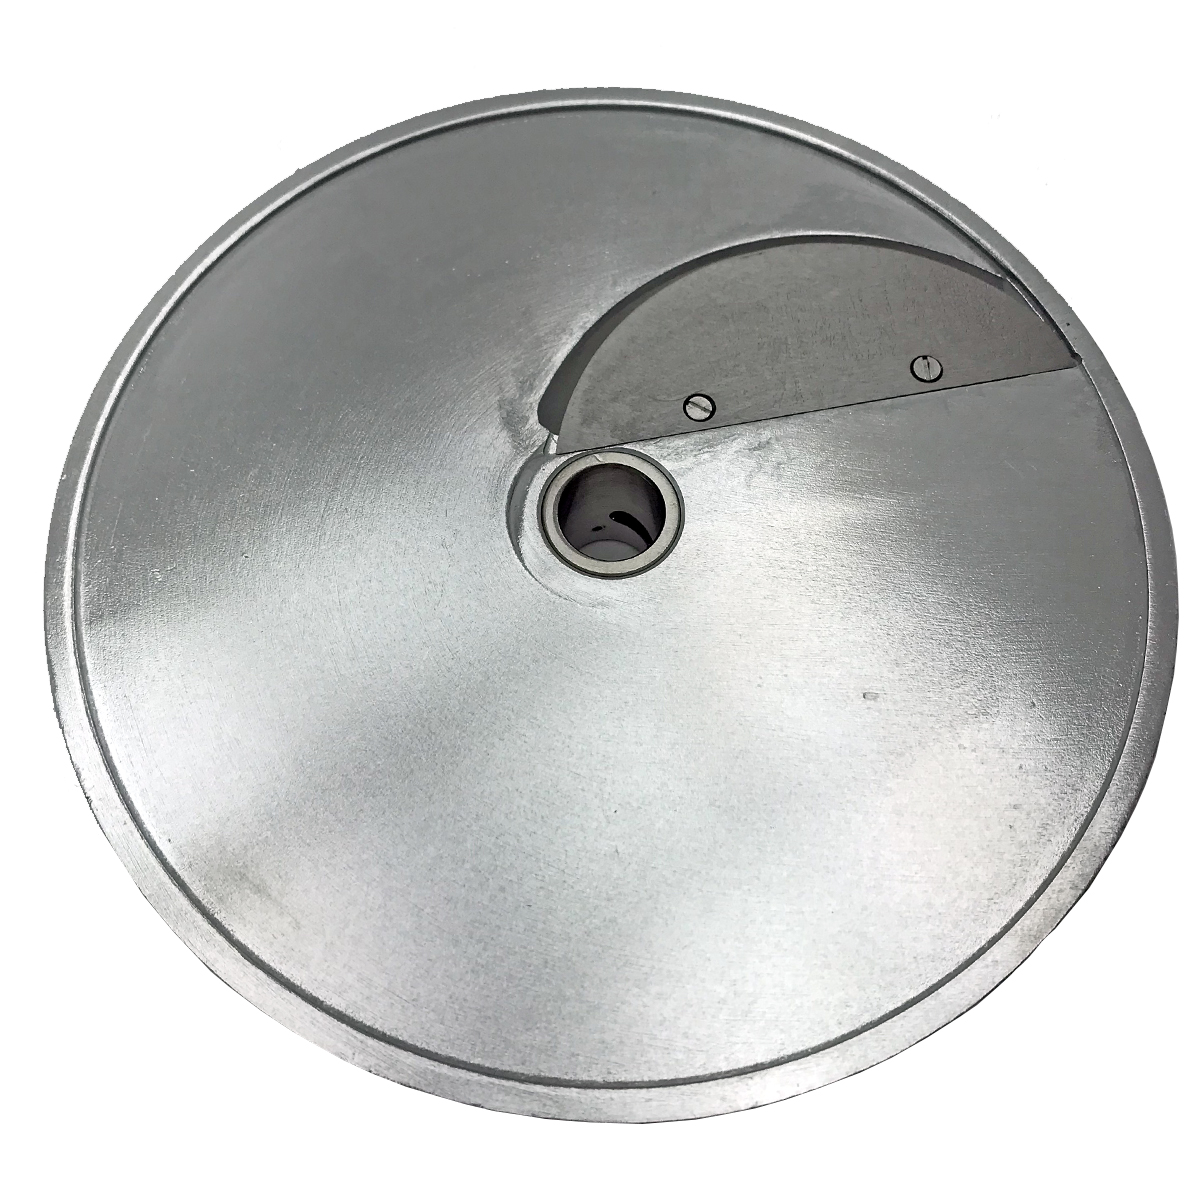 Cater-Prep CKP71117 1mm Slicing Disc for Cater-Prep CK7547